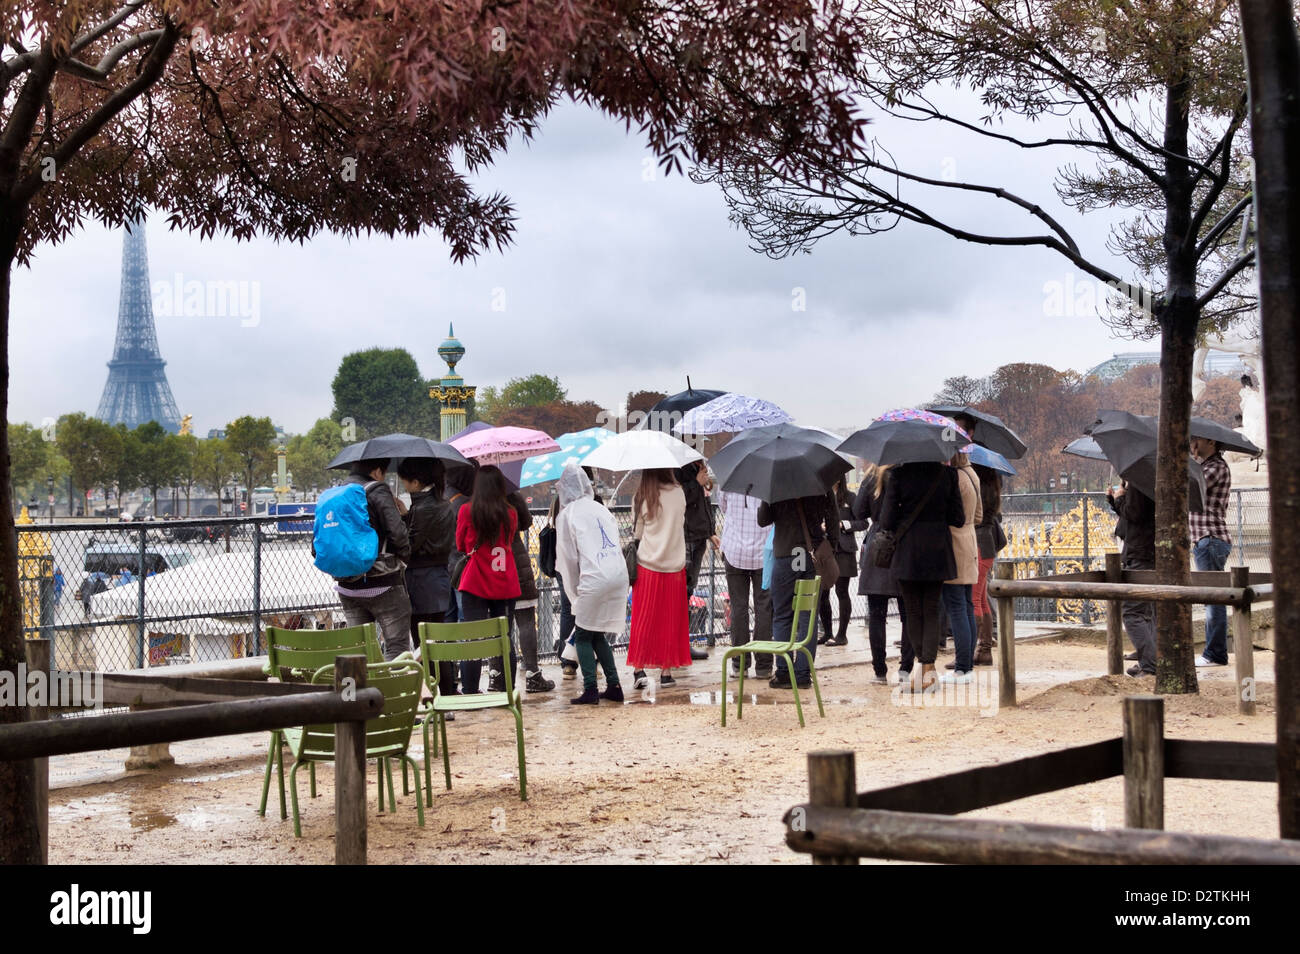 France - tourists group with umbrellas in Paris in the rain Stock Photo